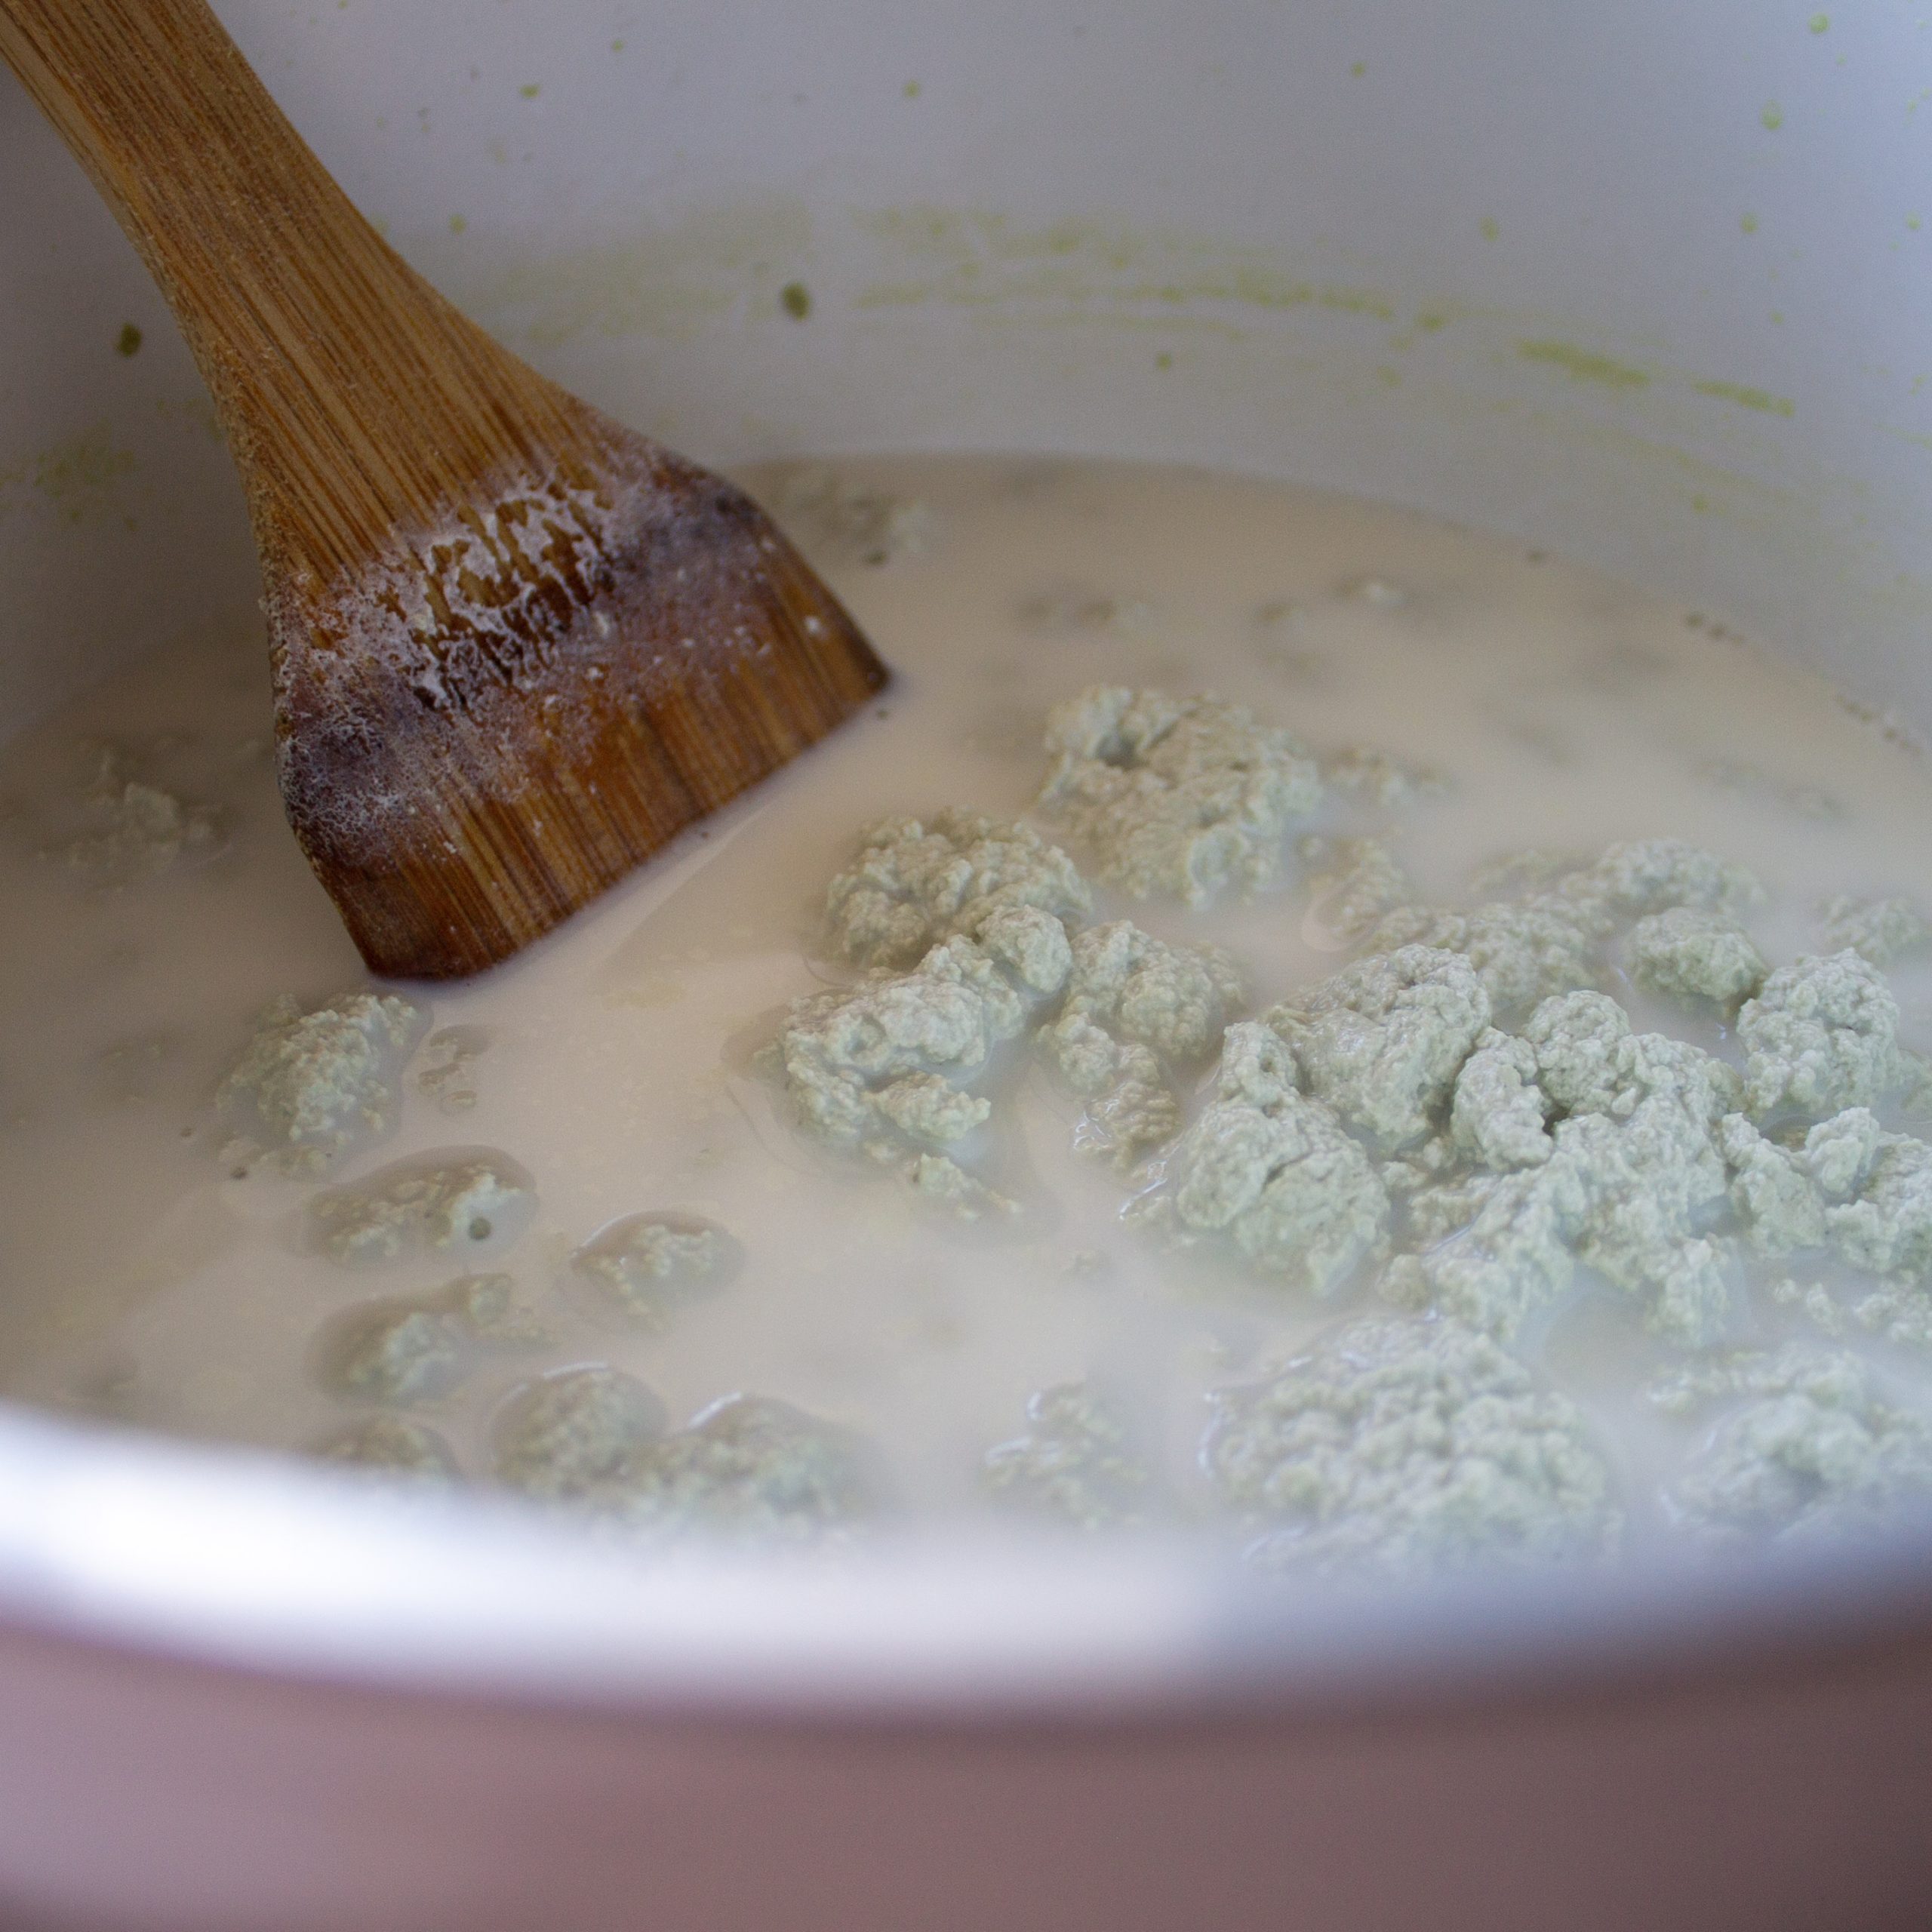 pot of pumpkin seed tofu curds and whey stirred by wooden spatula